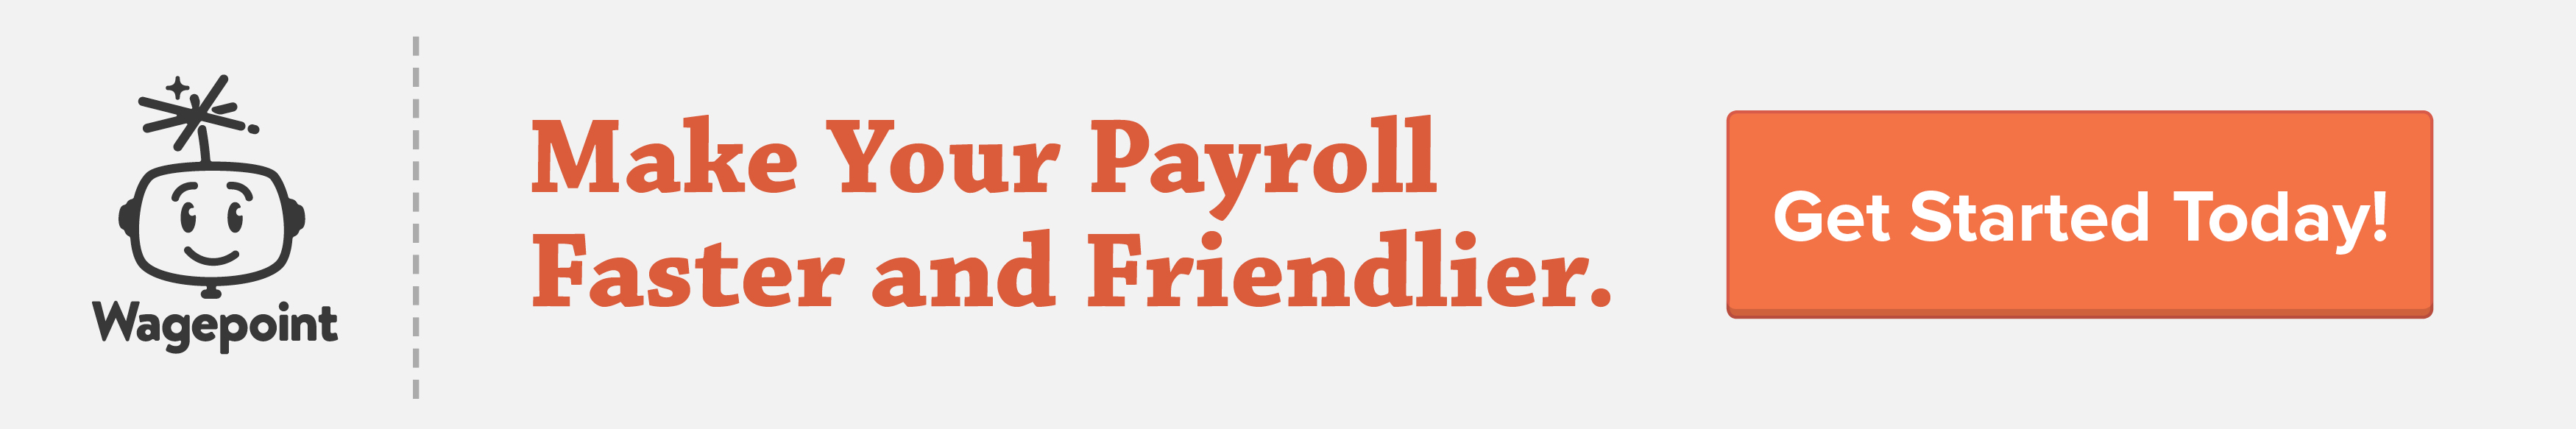 Wagepoint payroll software get started banner